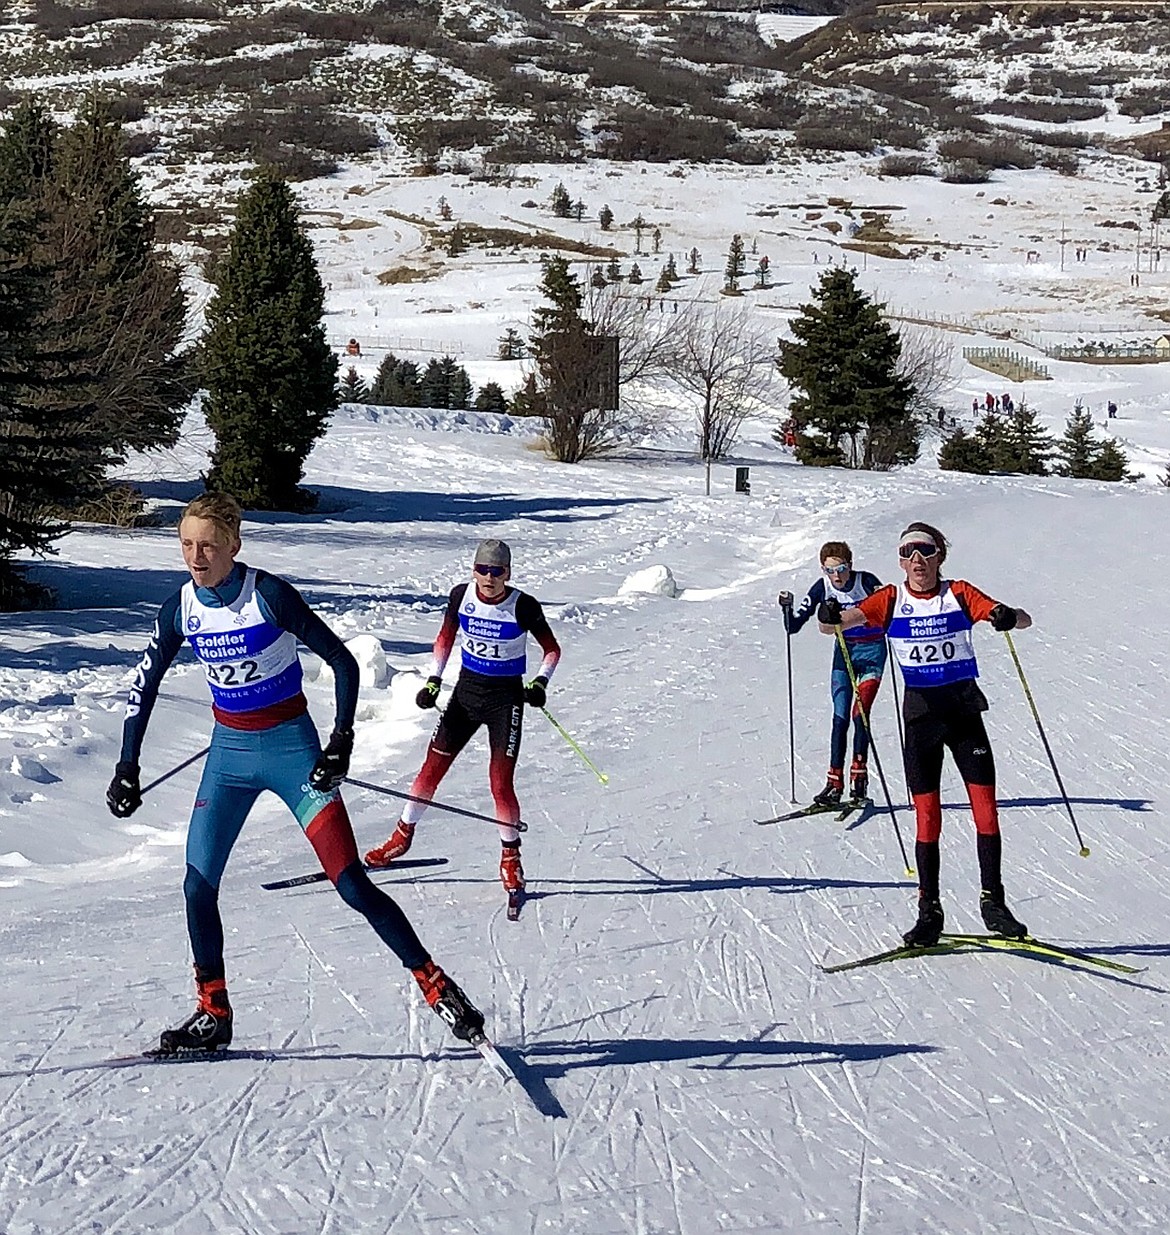 Glacier Nordic Ski Team athlete Ruedi Steiner competes in Midway, Utah, at the Soldier Hollow Nordic Center last weekend. (Courtesy photo)